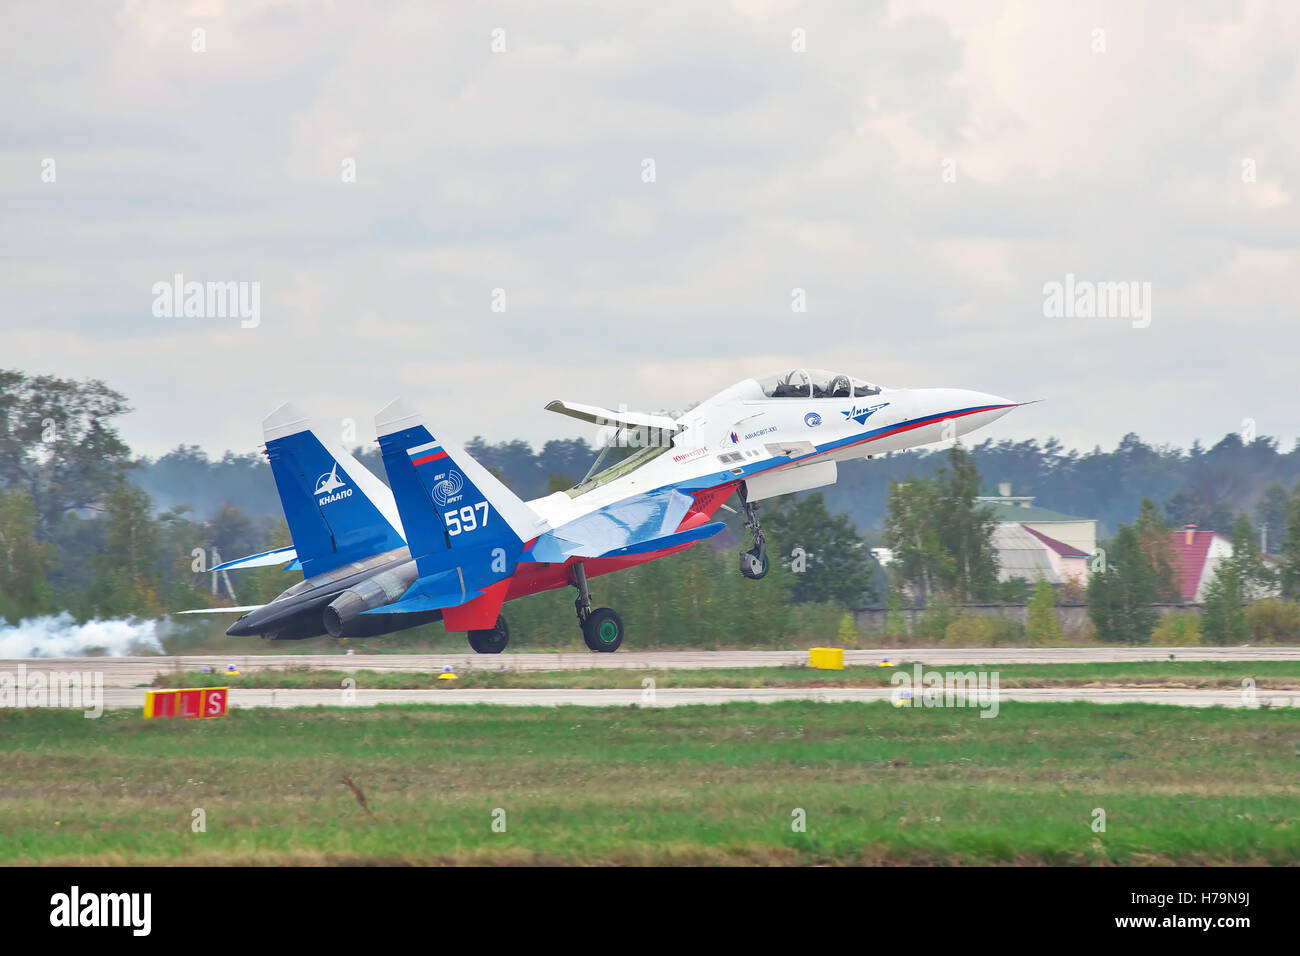 Kiev Region, Ukraine - October 2, 2010: Sukhoi Su-30LL fighter plane in Russian flag colors is landing with smoke on the runway Stock Photo